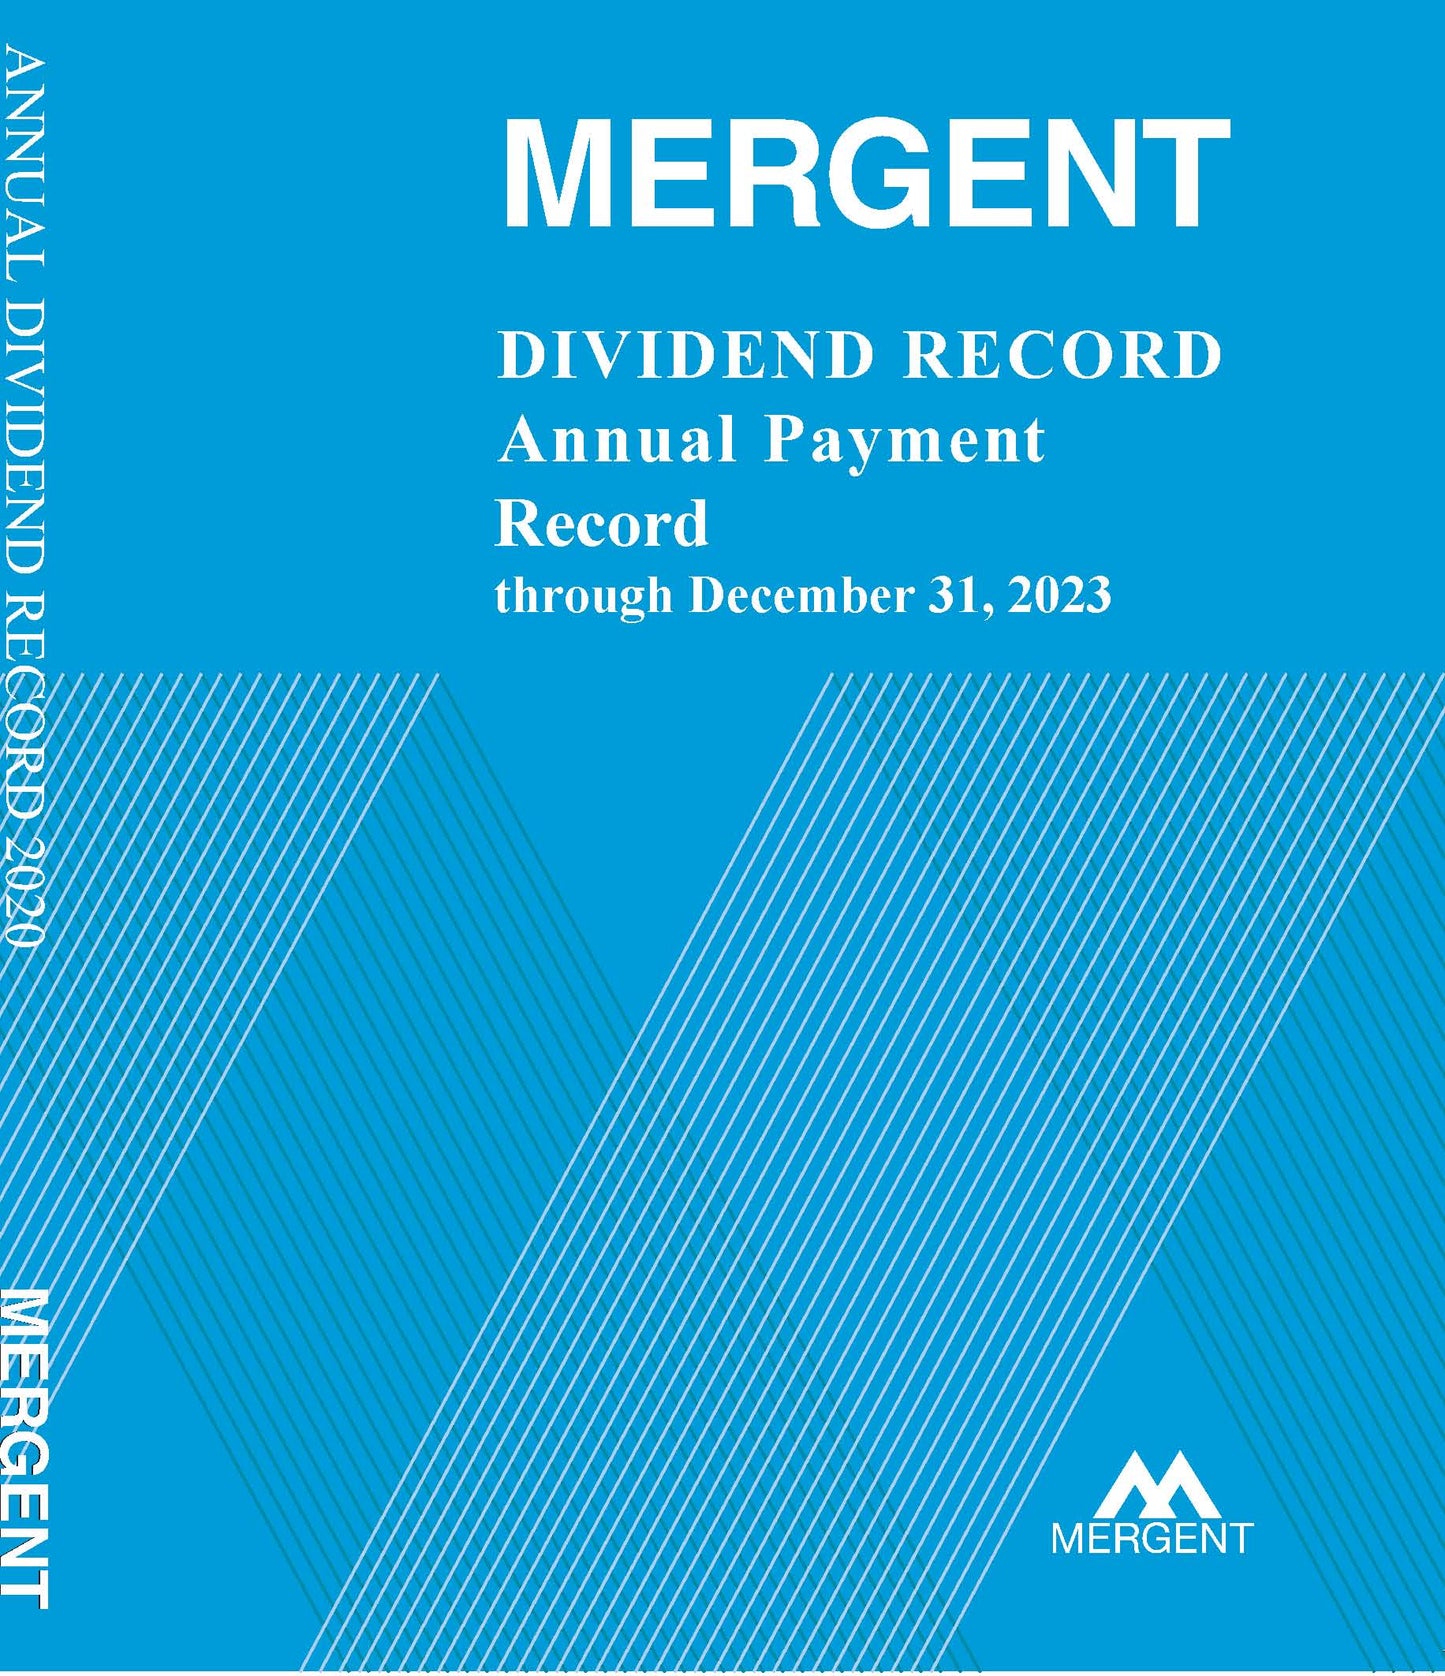 ELECTRONIC & PRINT DIVIDEND RECORD PACKAGE